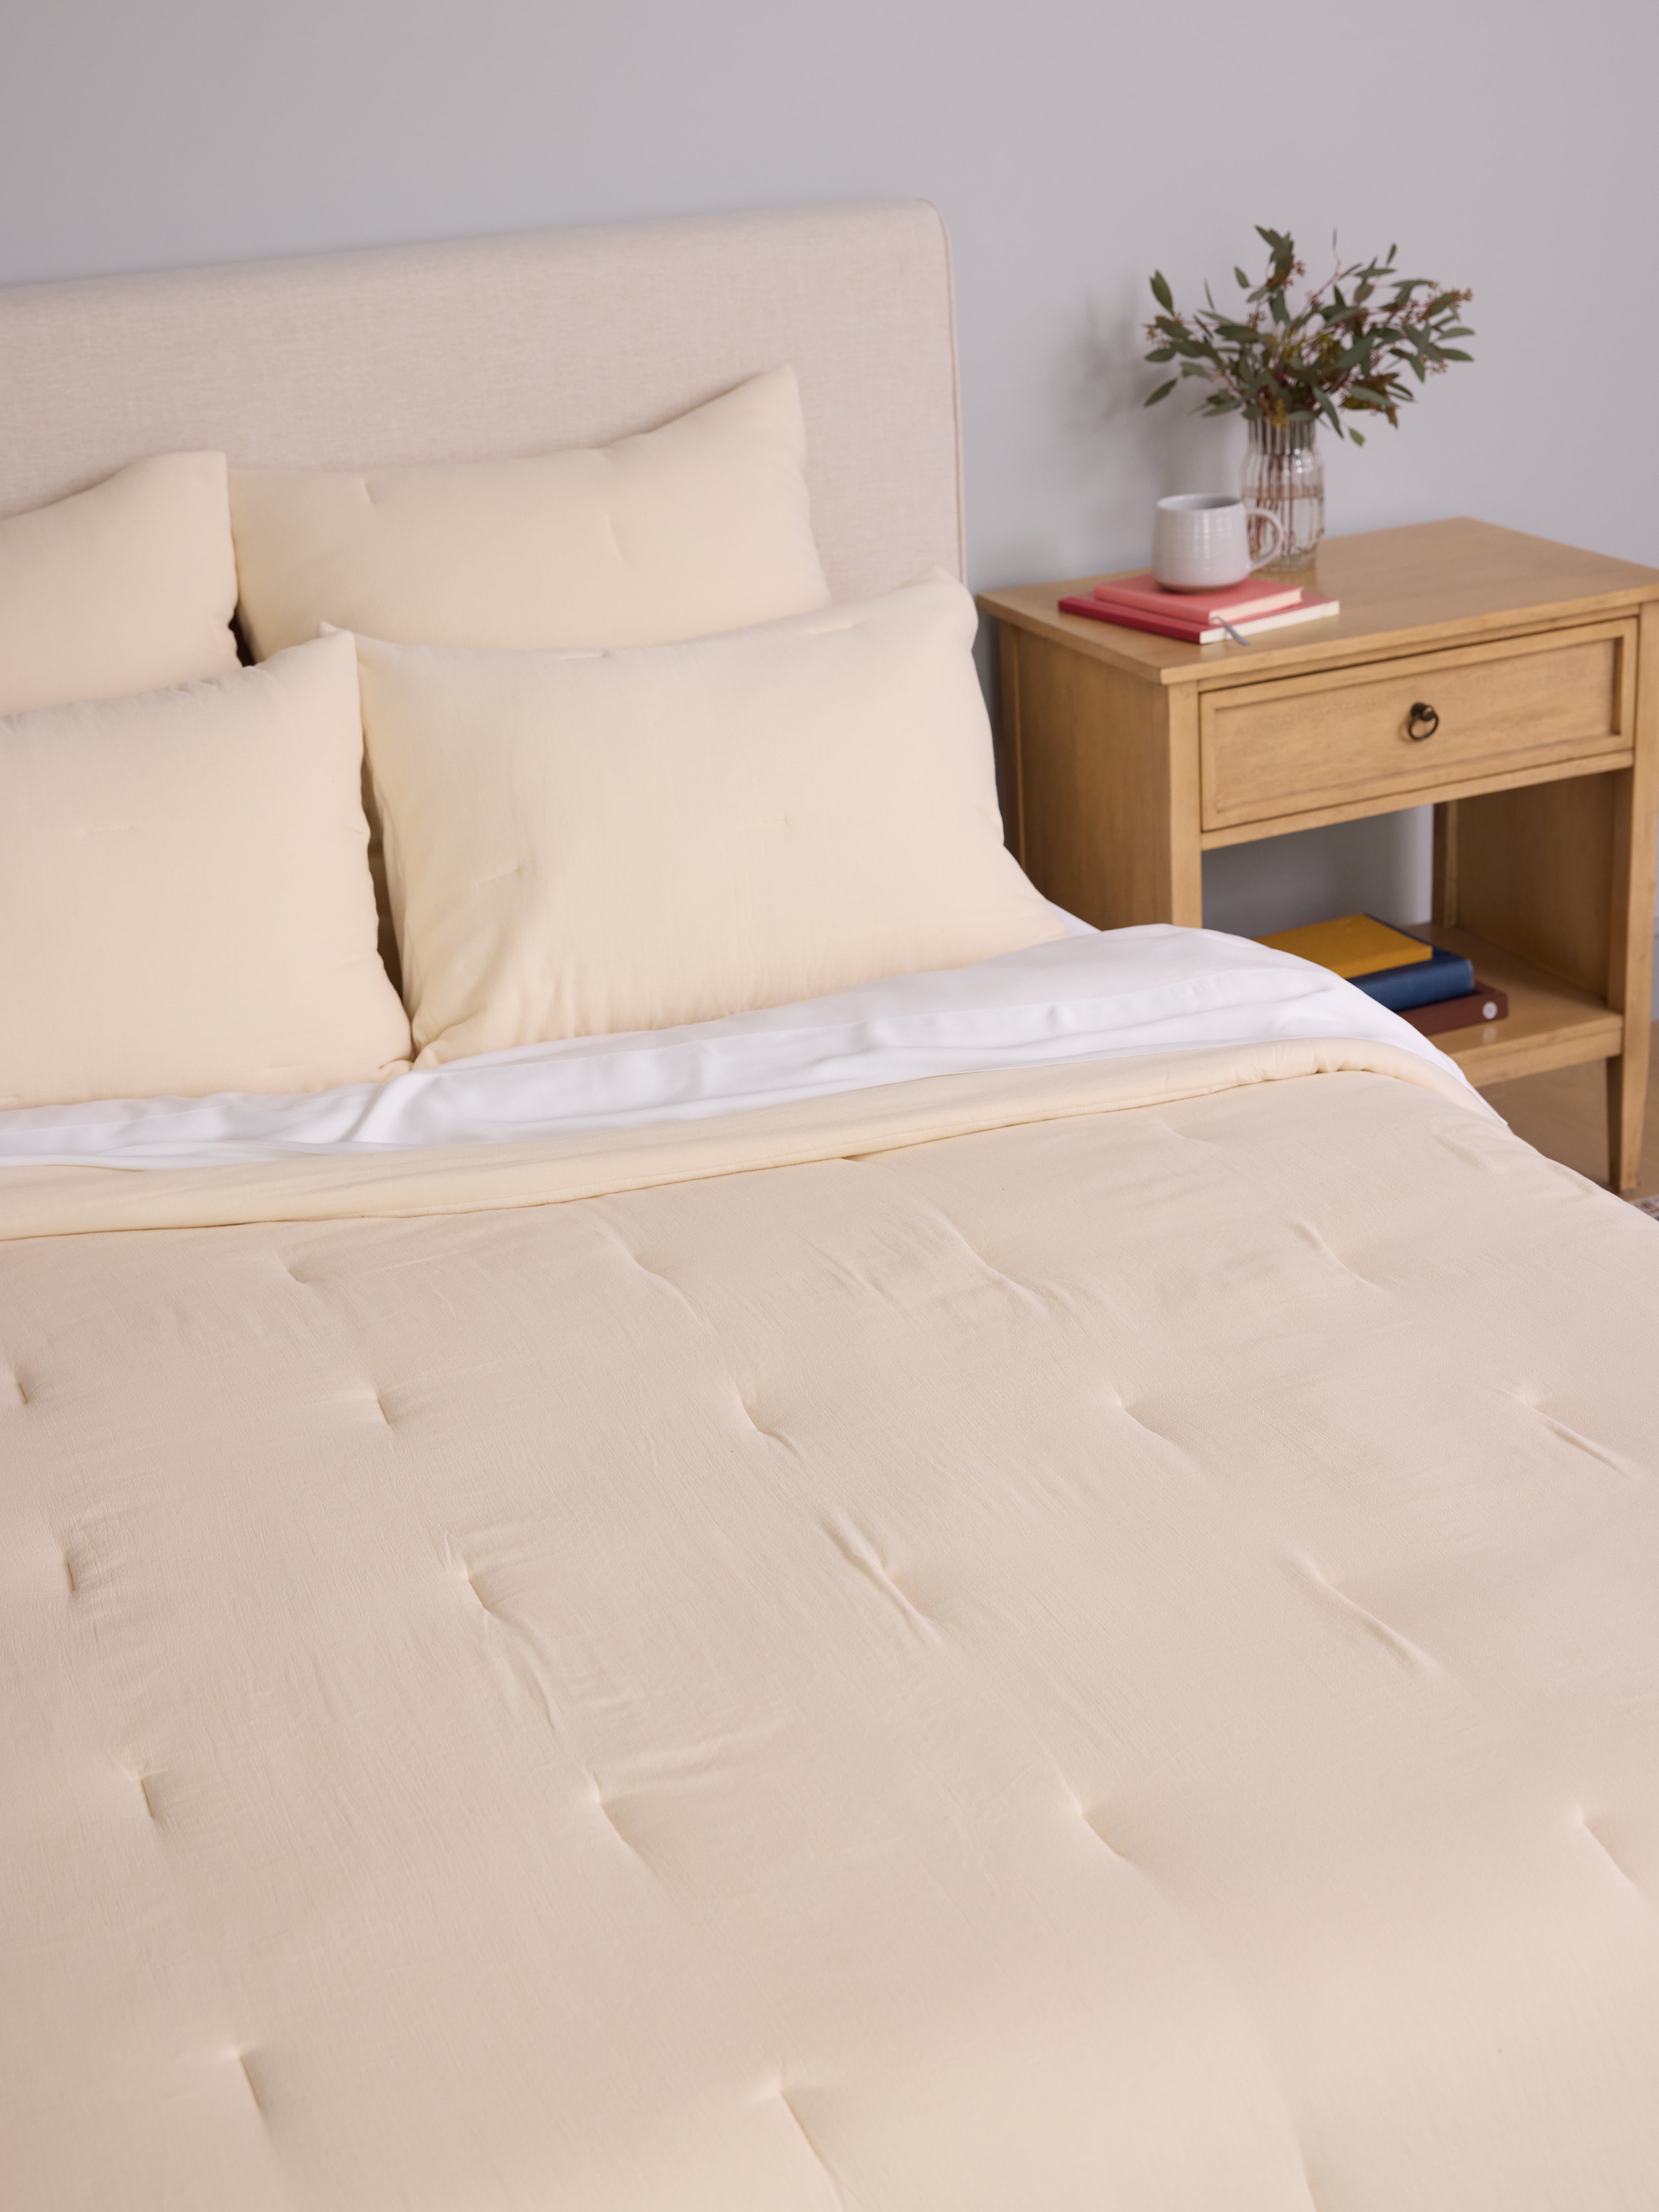 Buttermilk Aire Bamboo Puckered Shams. The shams are resting on a bed in a bedroom|Color:Buttermilk|Style:Euro